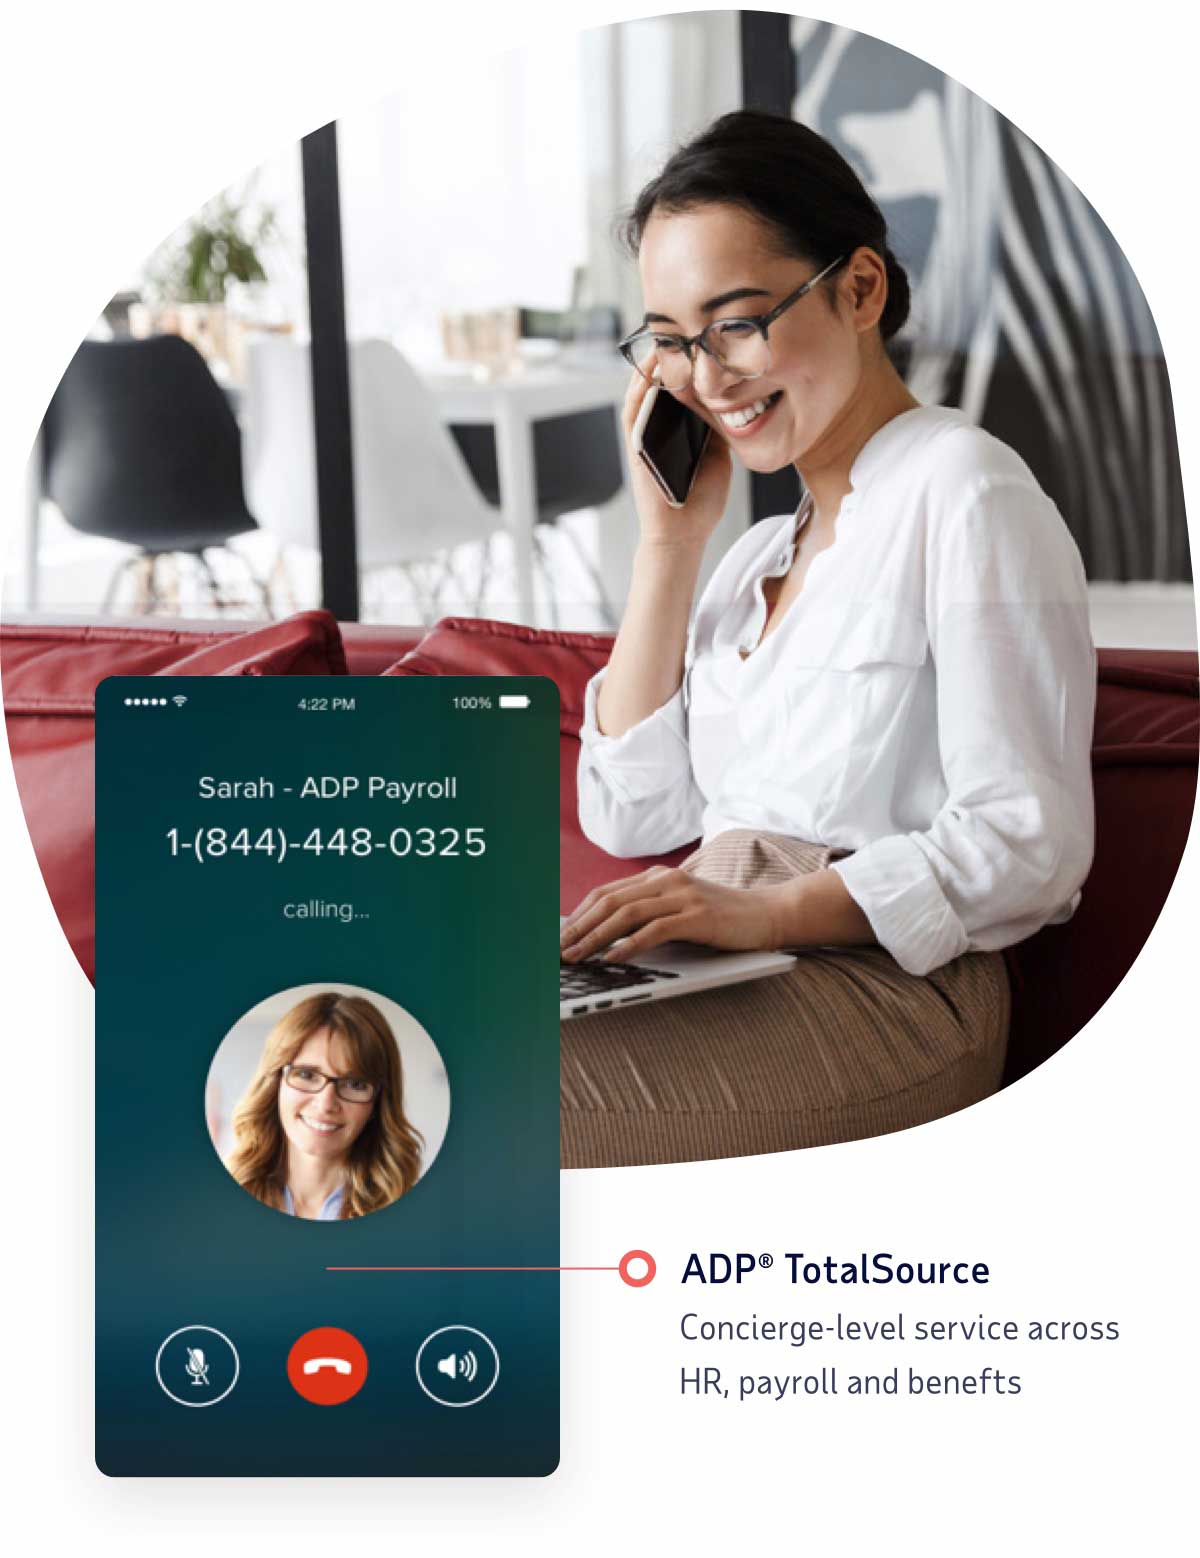 Woman on the phone with ADP TotalSource support specialist for concierge-level service across HR, payroll and benefits